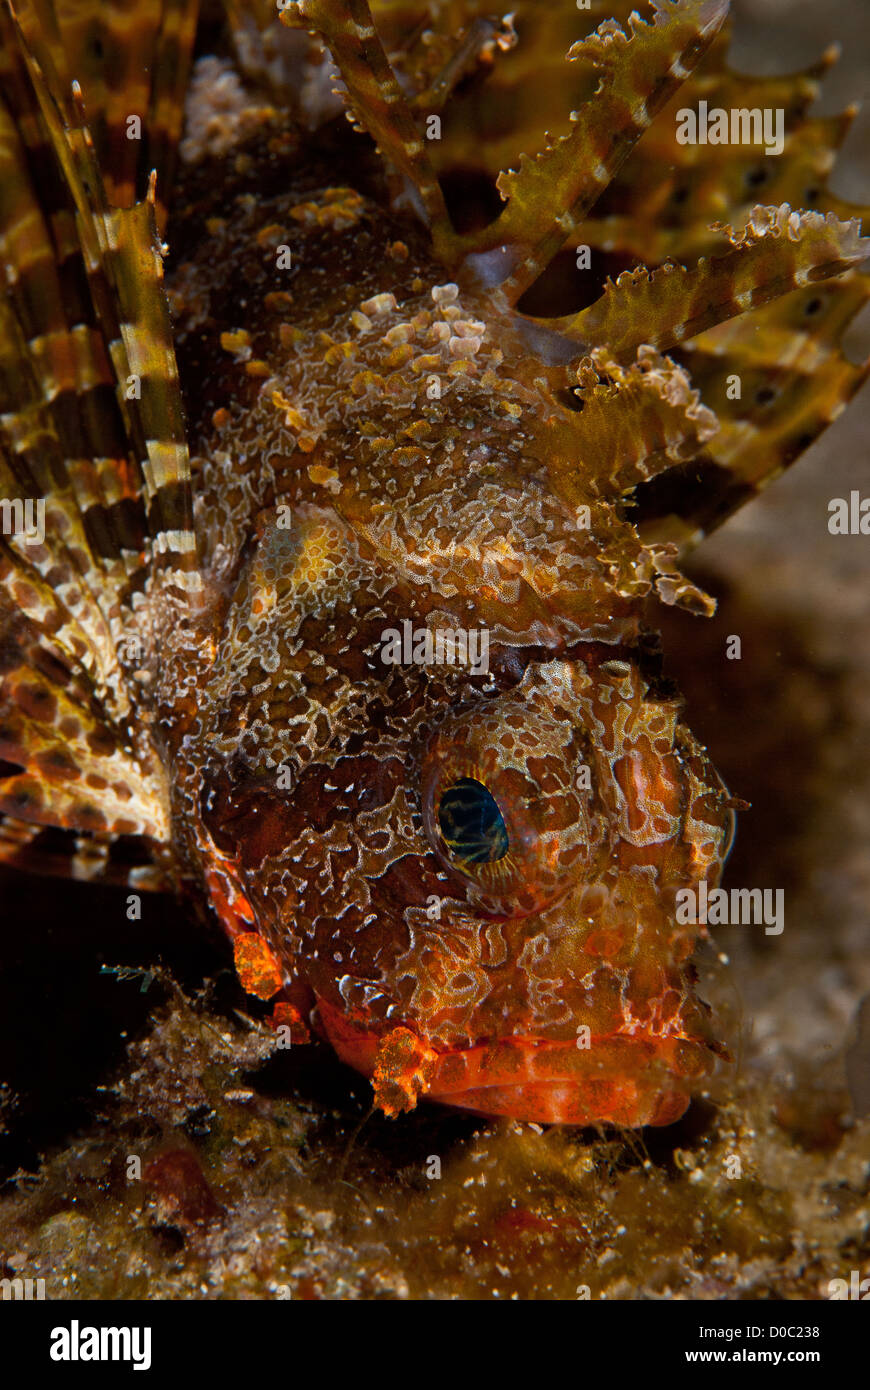 the face portrait of a shortfin lionfish (Dendrochirus brachypterus) seeing during a night dive at Wainilu, Komodo National Park Stock Photo